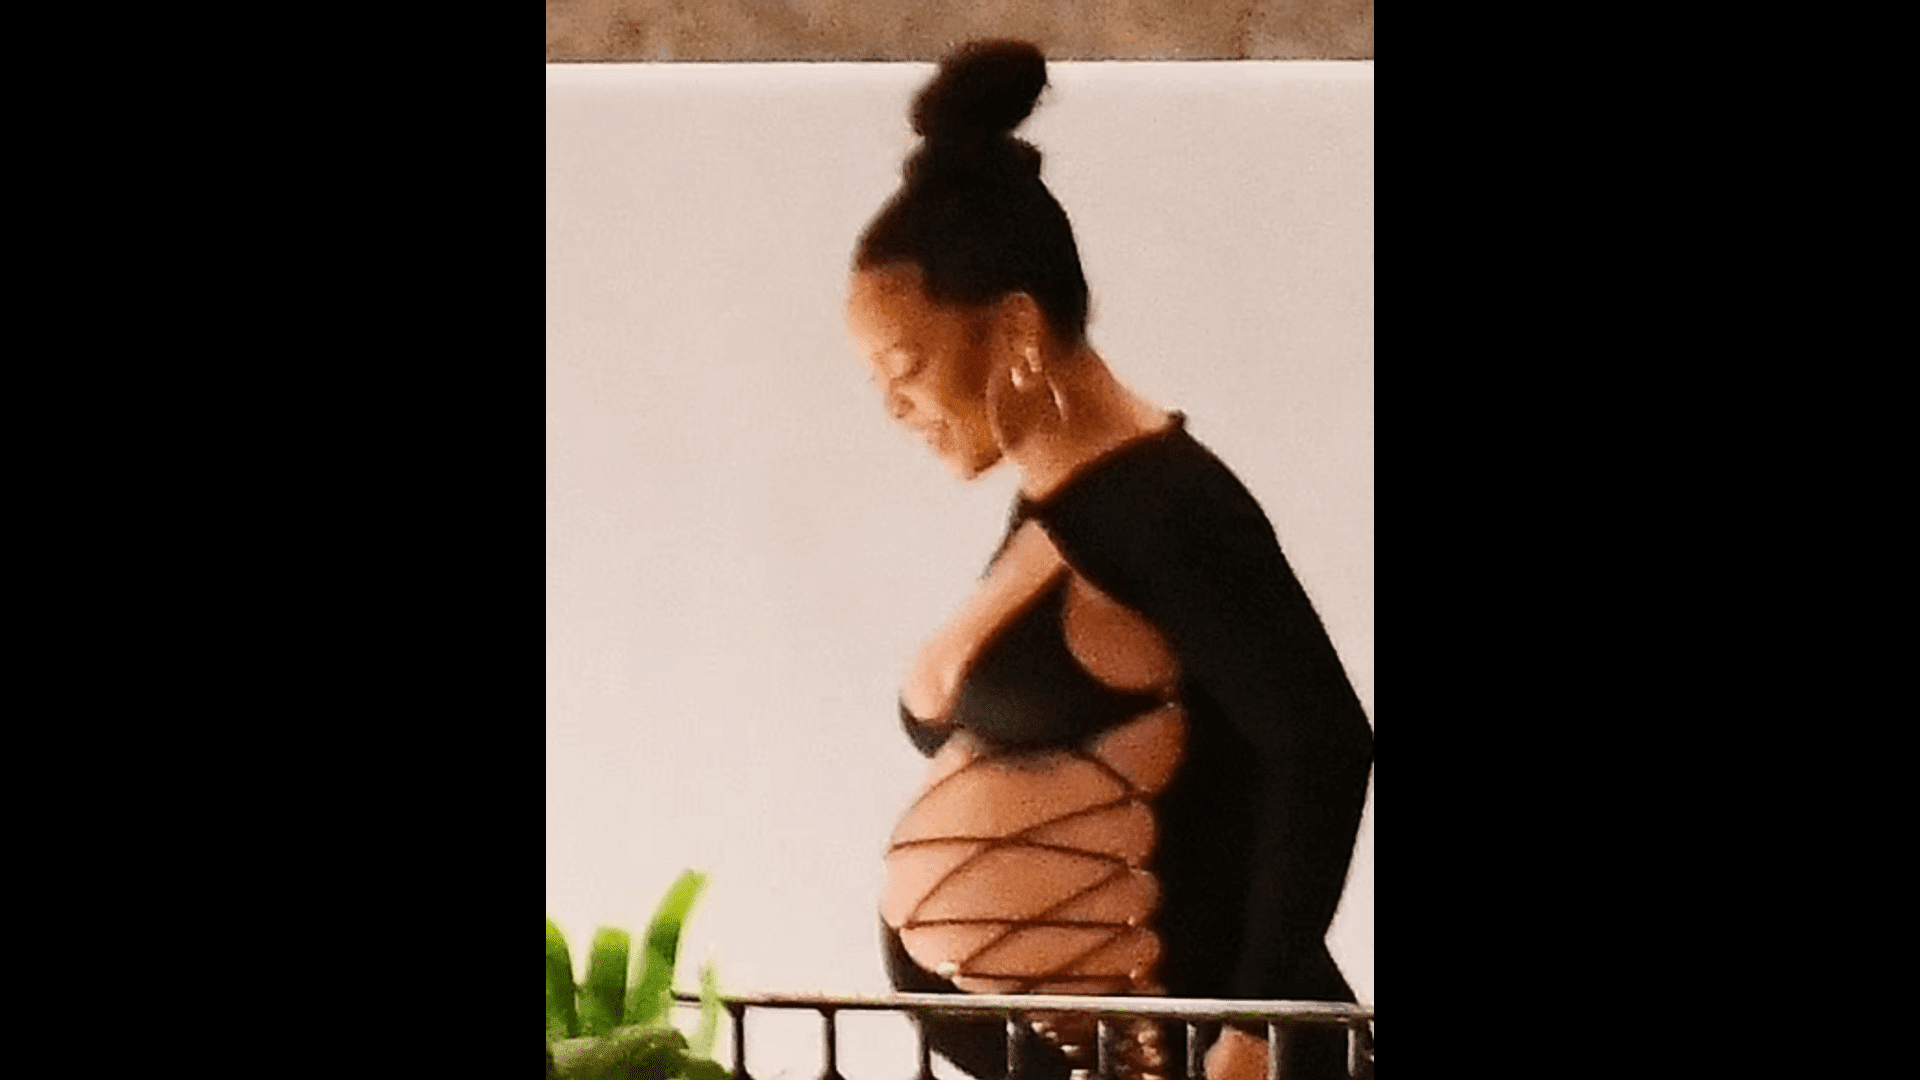 rihanna-proudly-shows-off-her-growing-belly-in-a-slit-dress